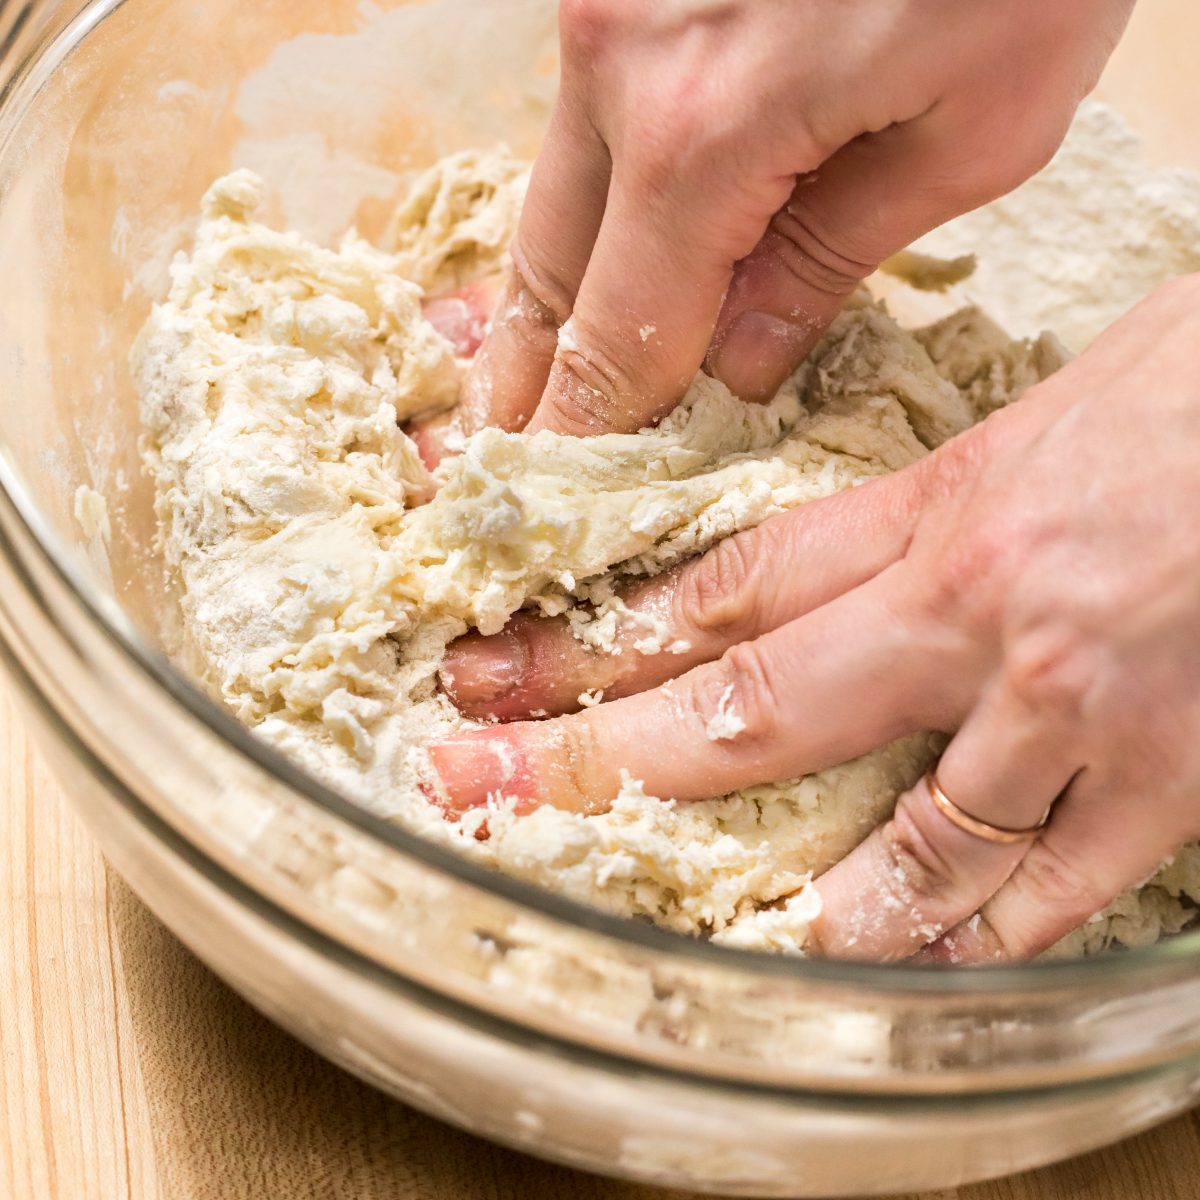 Work ingredients together with your hands until a ball of dough forms.